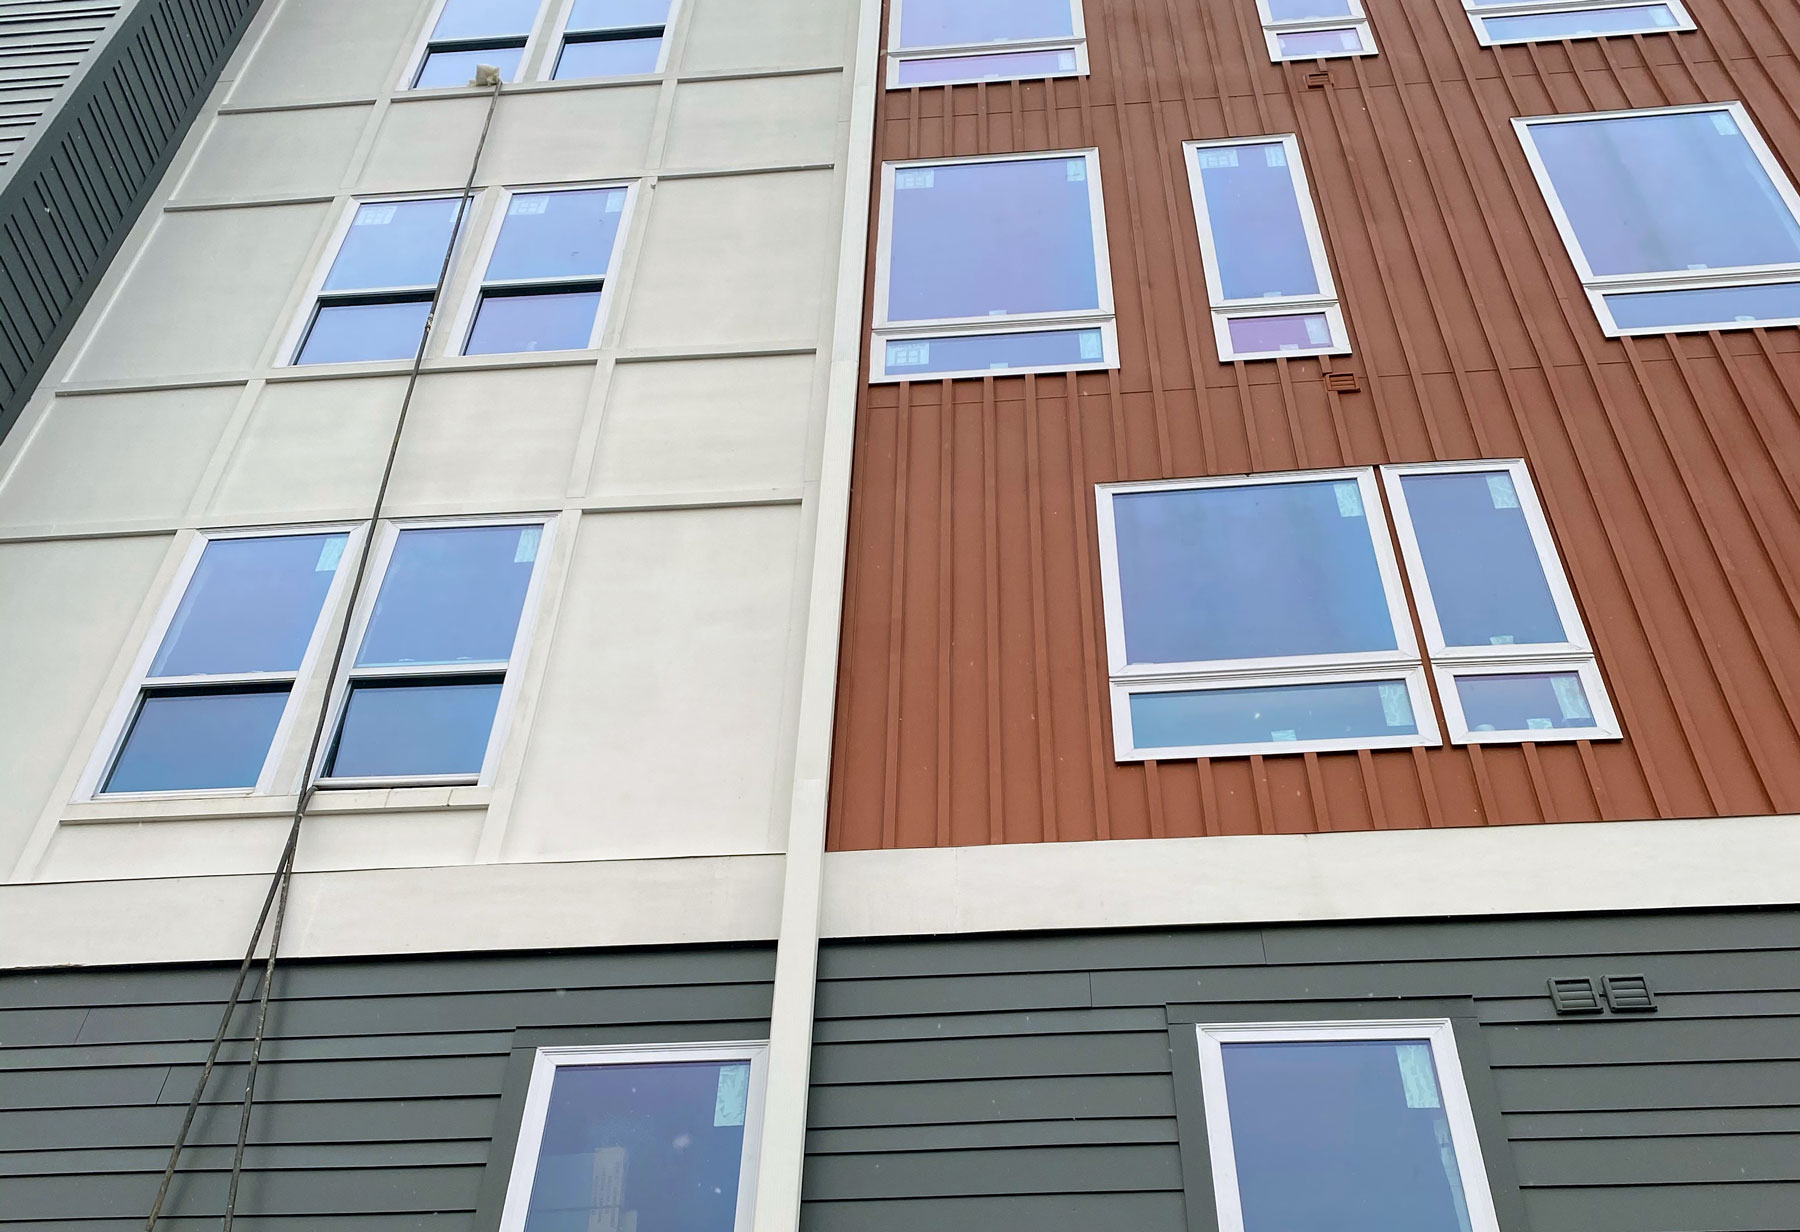 new siding and windows installed in an apartment building